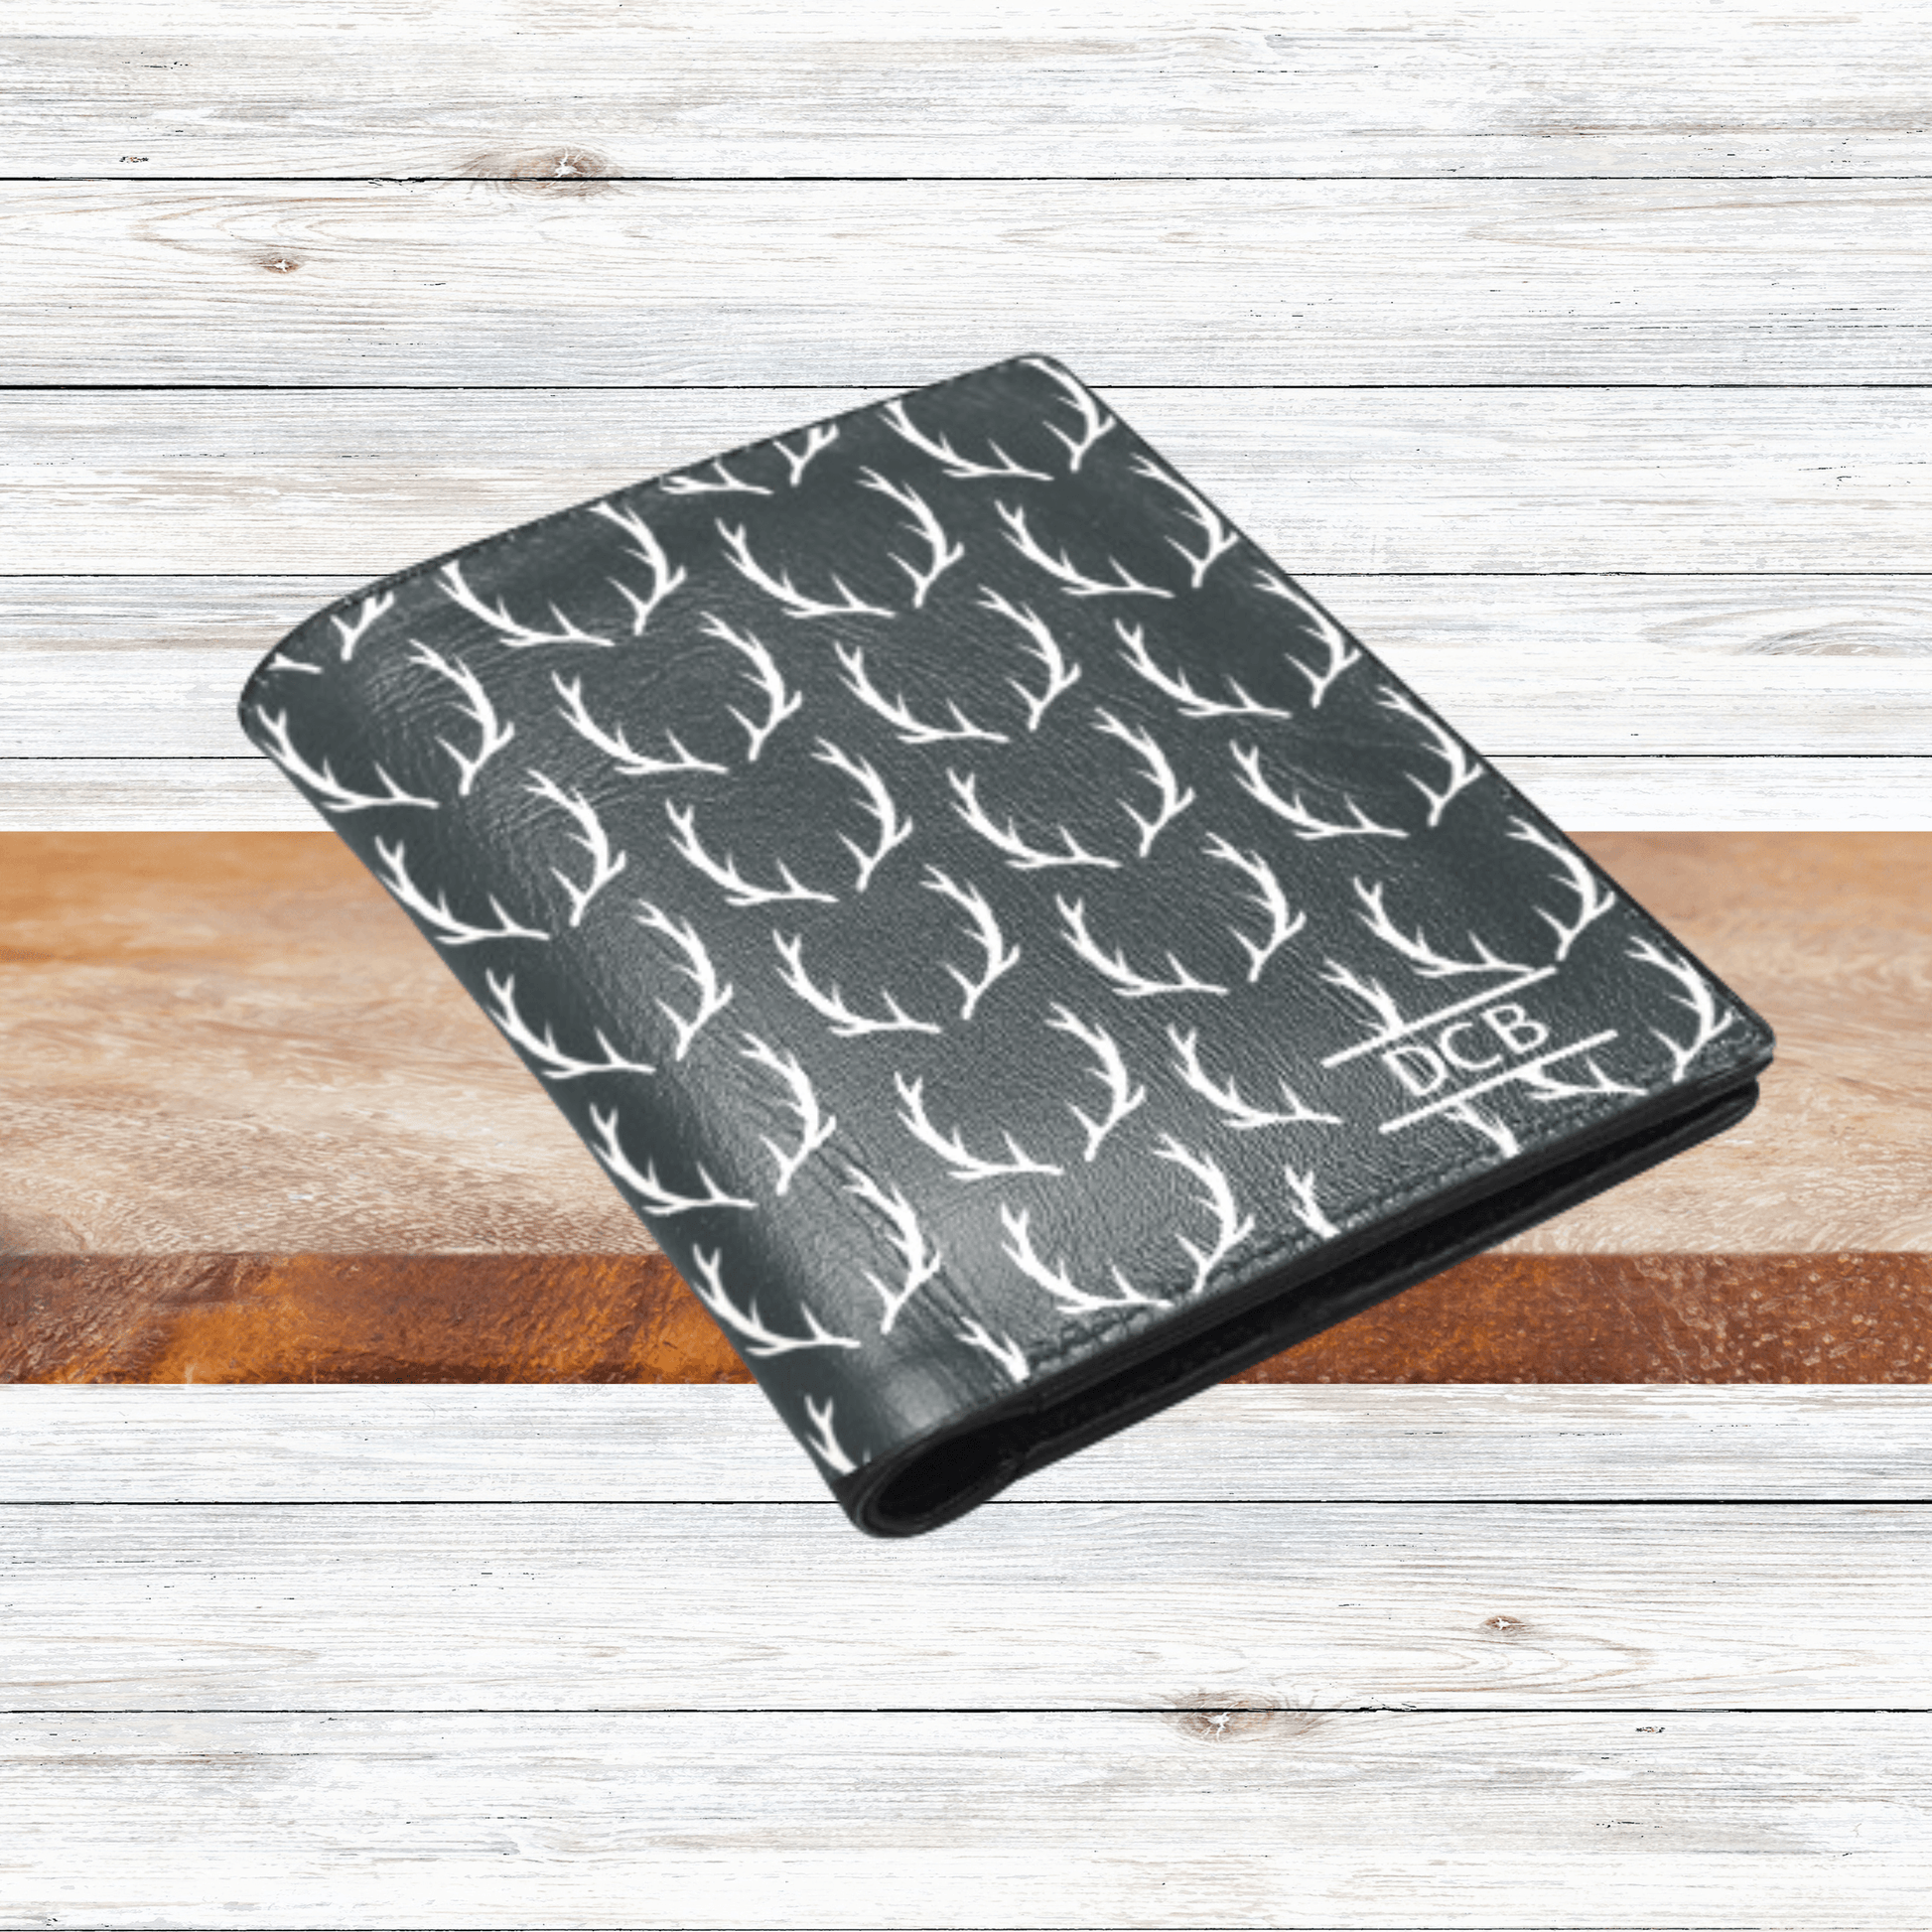 Our personalized black wallet for deer hunters. This sleek black wallet with deer antlers makes a great custom gift for groomsmen and outdoor lovers.